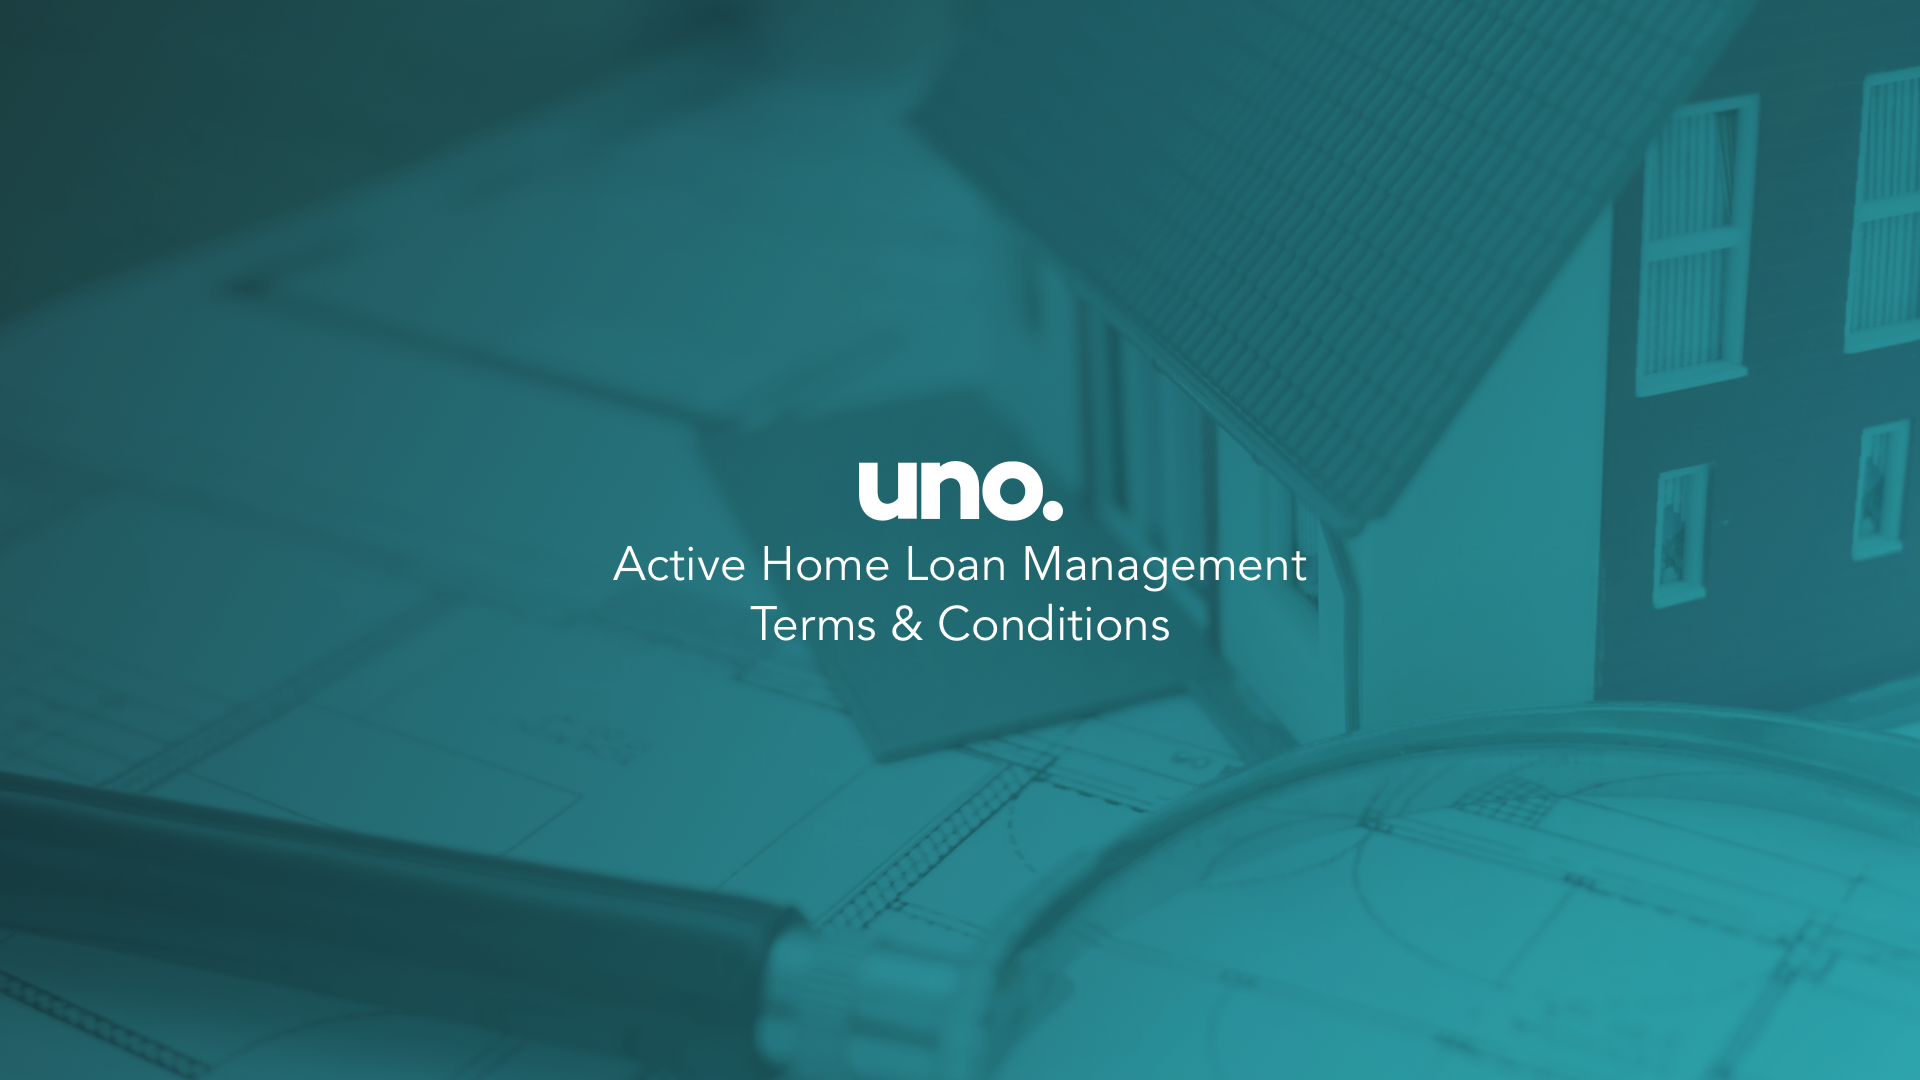 Active Home Loan Management Terms & Conditions